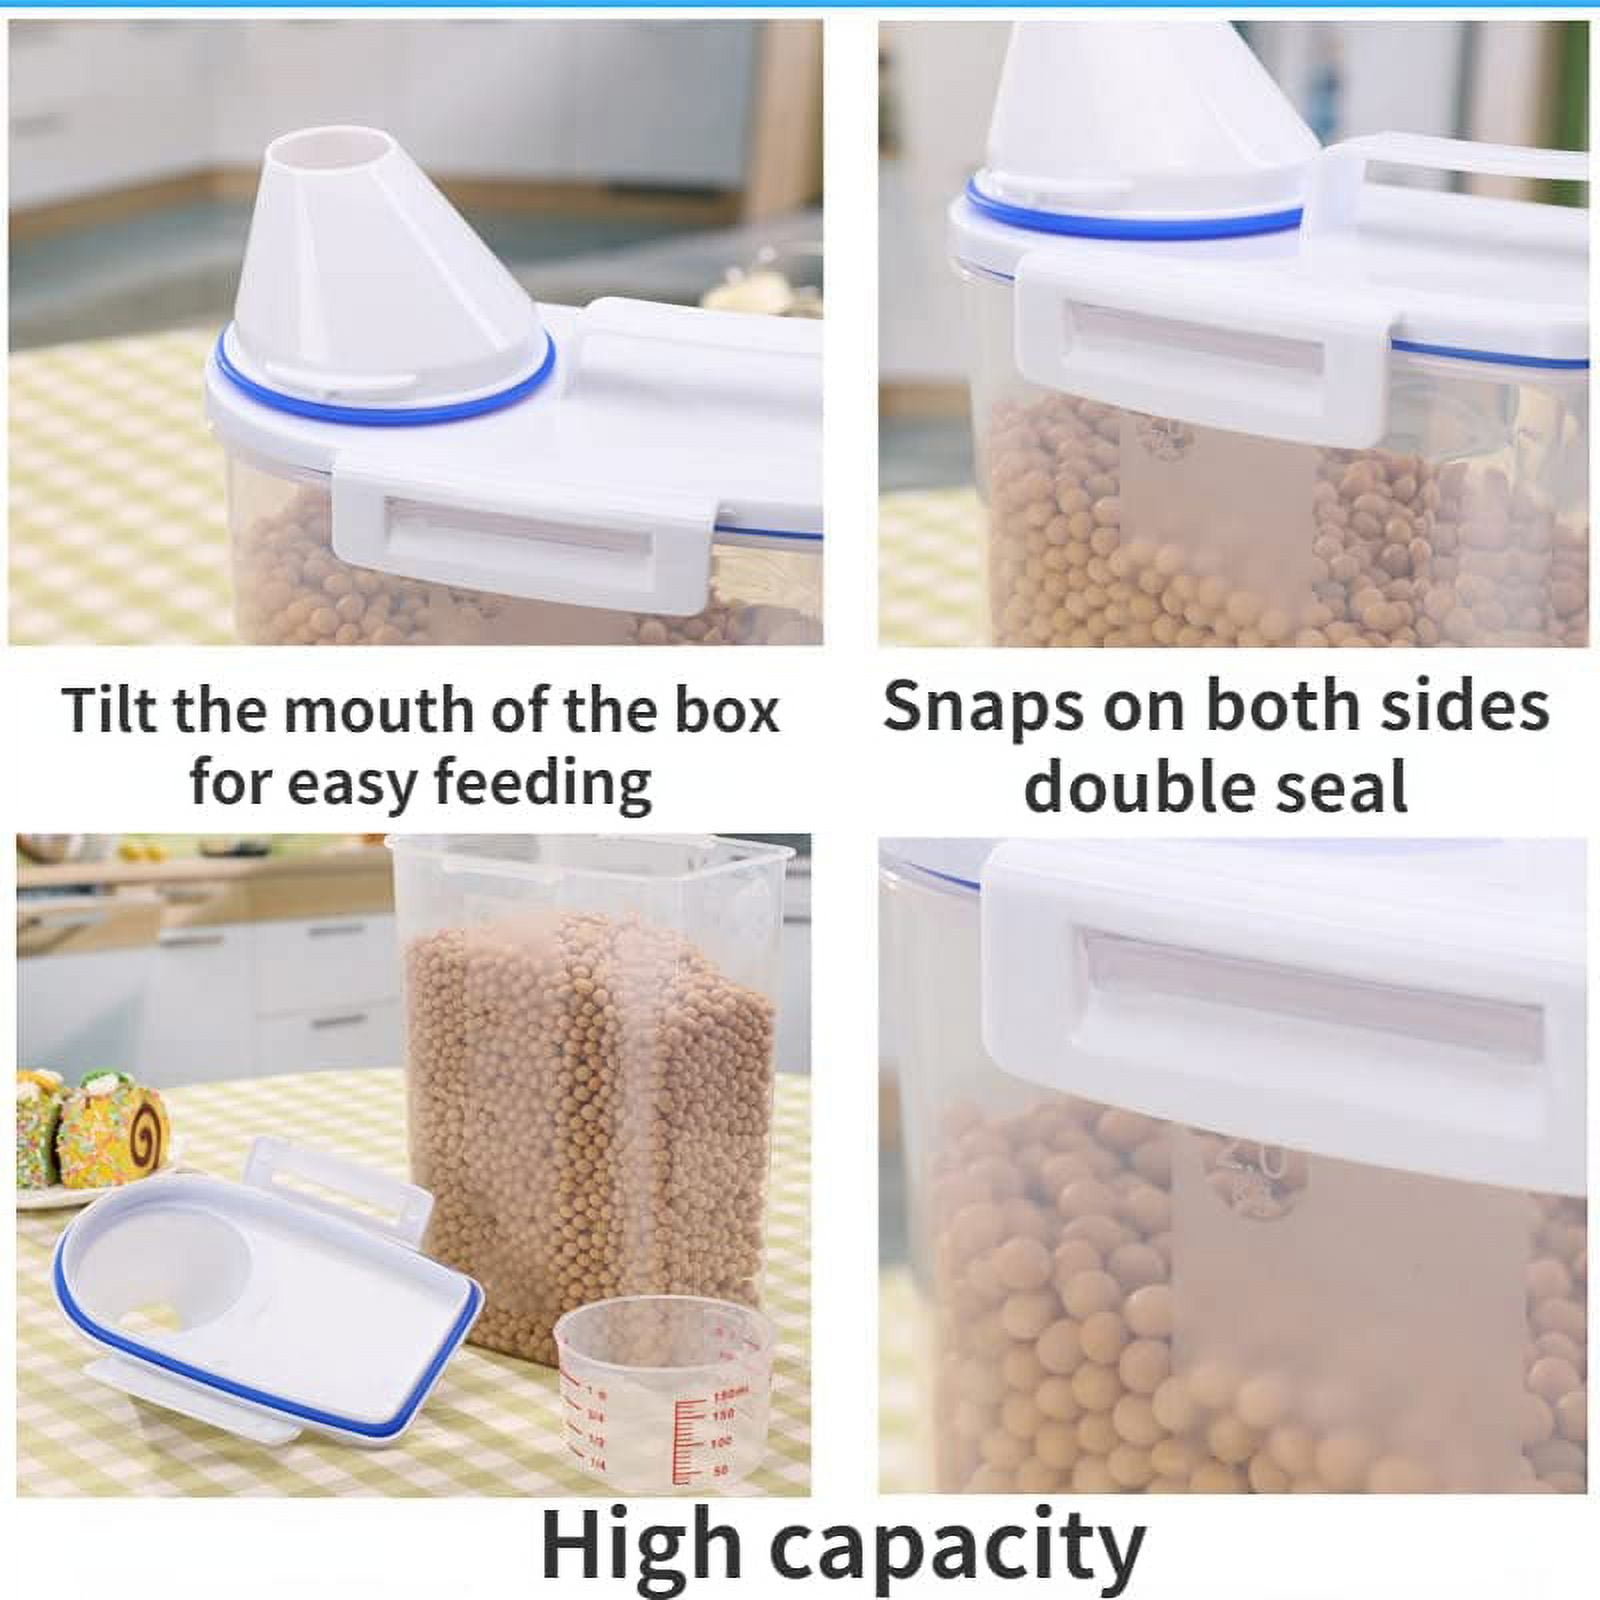 rice storage container - متجر اختياري